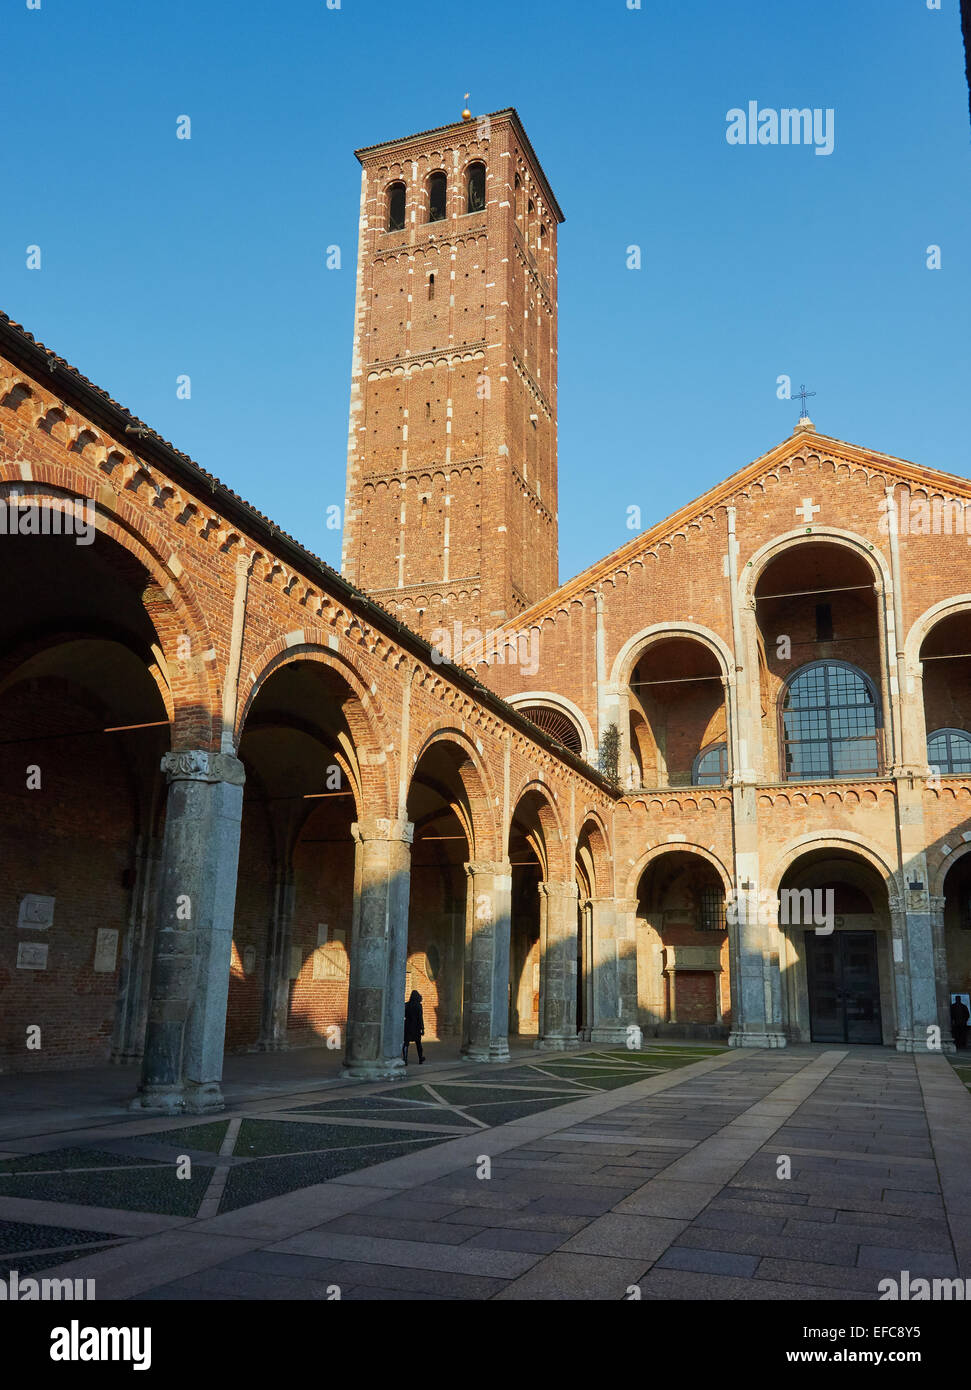 Porticoed atrium courtyard and bell tower of Romanesque Sant' Ambrogio Basilica Milan Lombardy Italy Europe Stock Photo